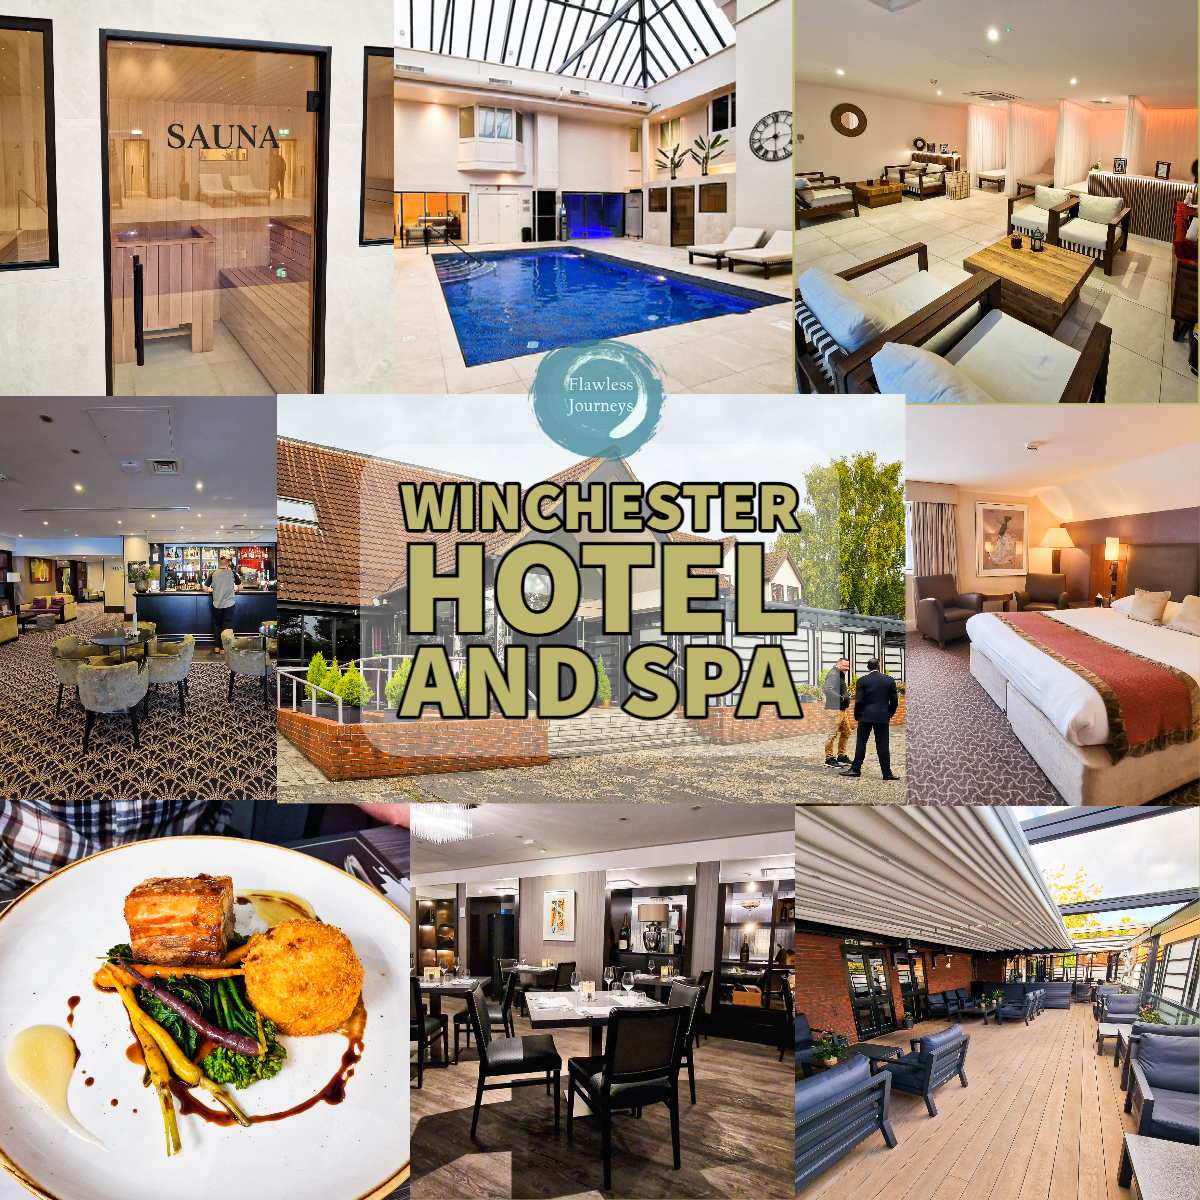 A collage of images which are the sauna, a swimming pool, relaxation area , a double bedroom, bar area, outdoor terrace, a pork belly dinner and Alfred's restaurant at the Winchester hotel and spa